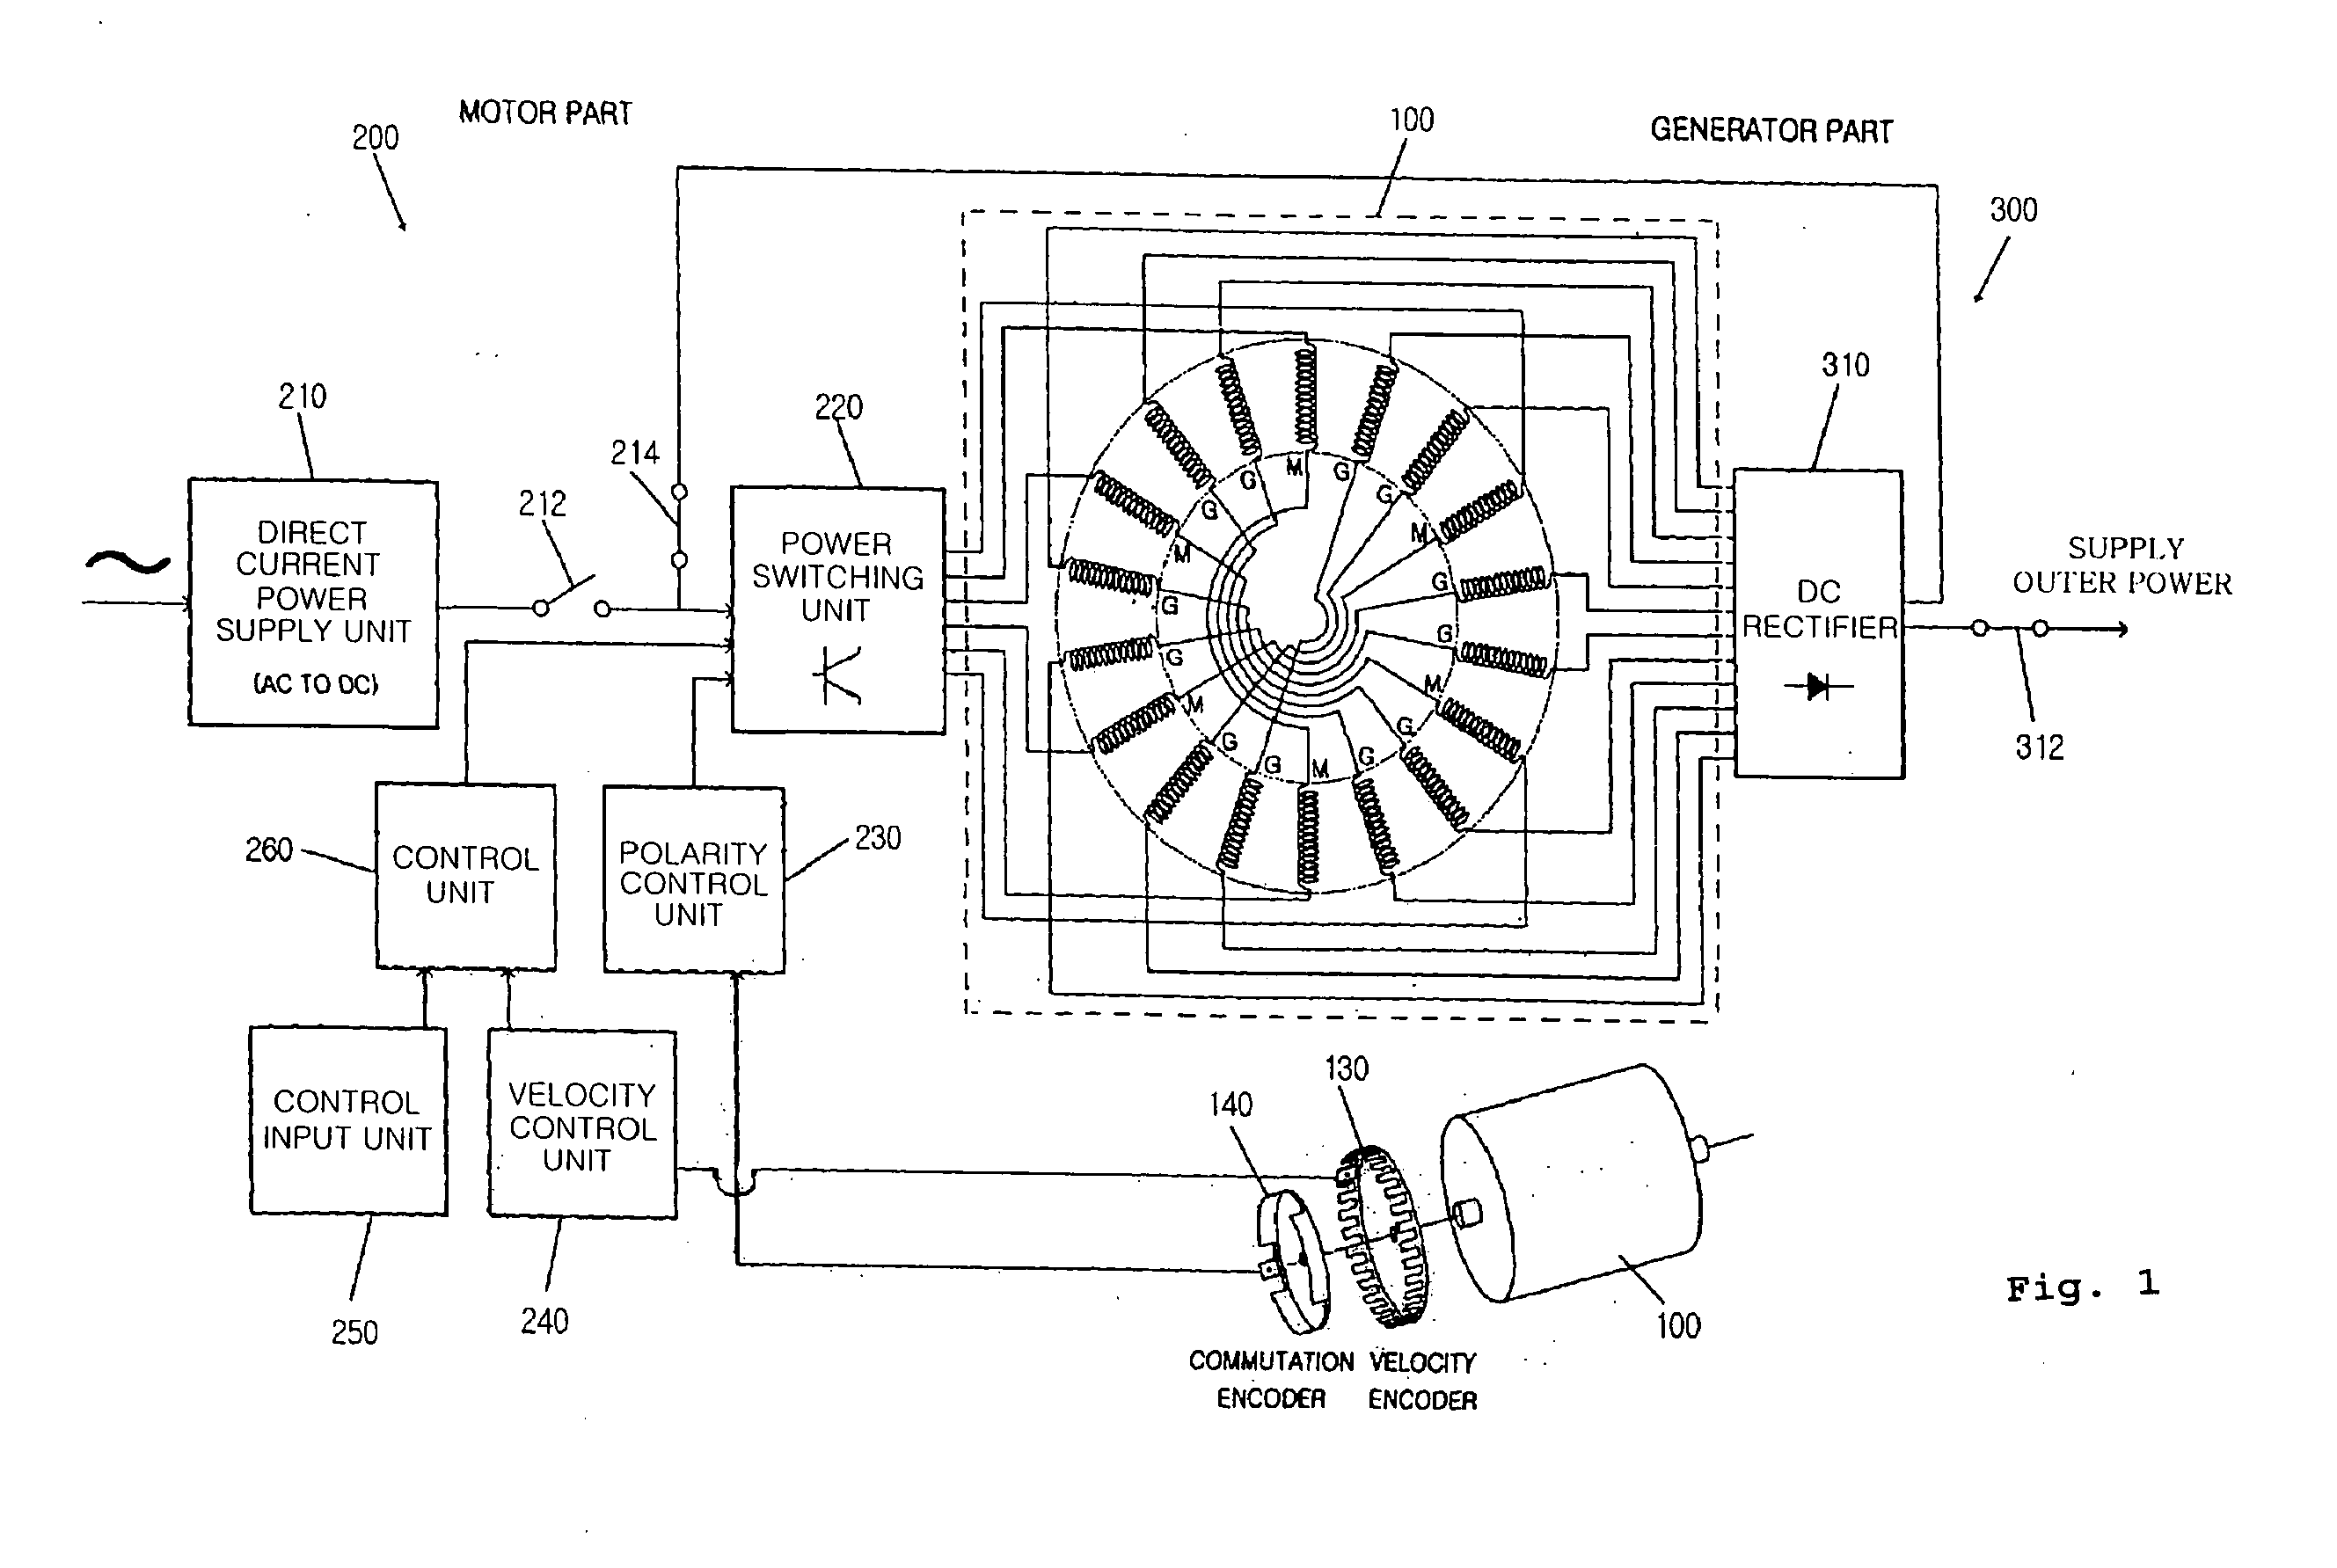 An over unity motor patent application (withdrawn). It doesn’t matter how many extra components you add, a motor connected to a generator cannot create energy (European Patent Office)